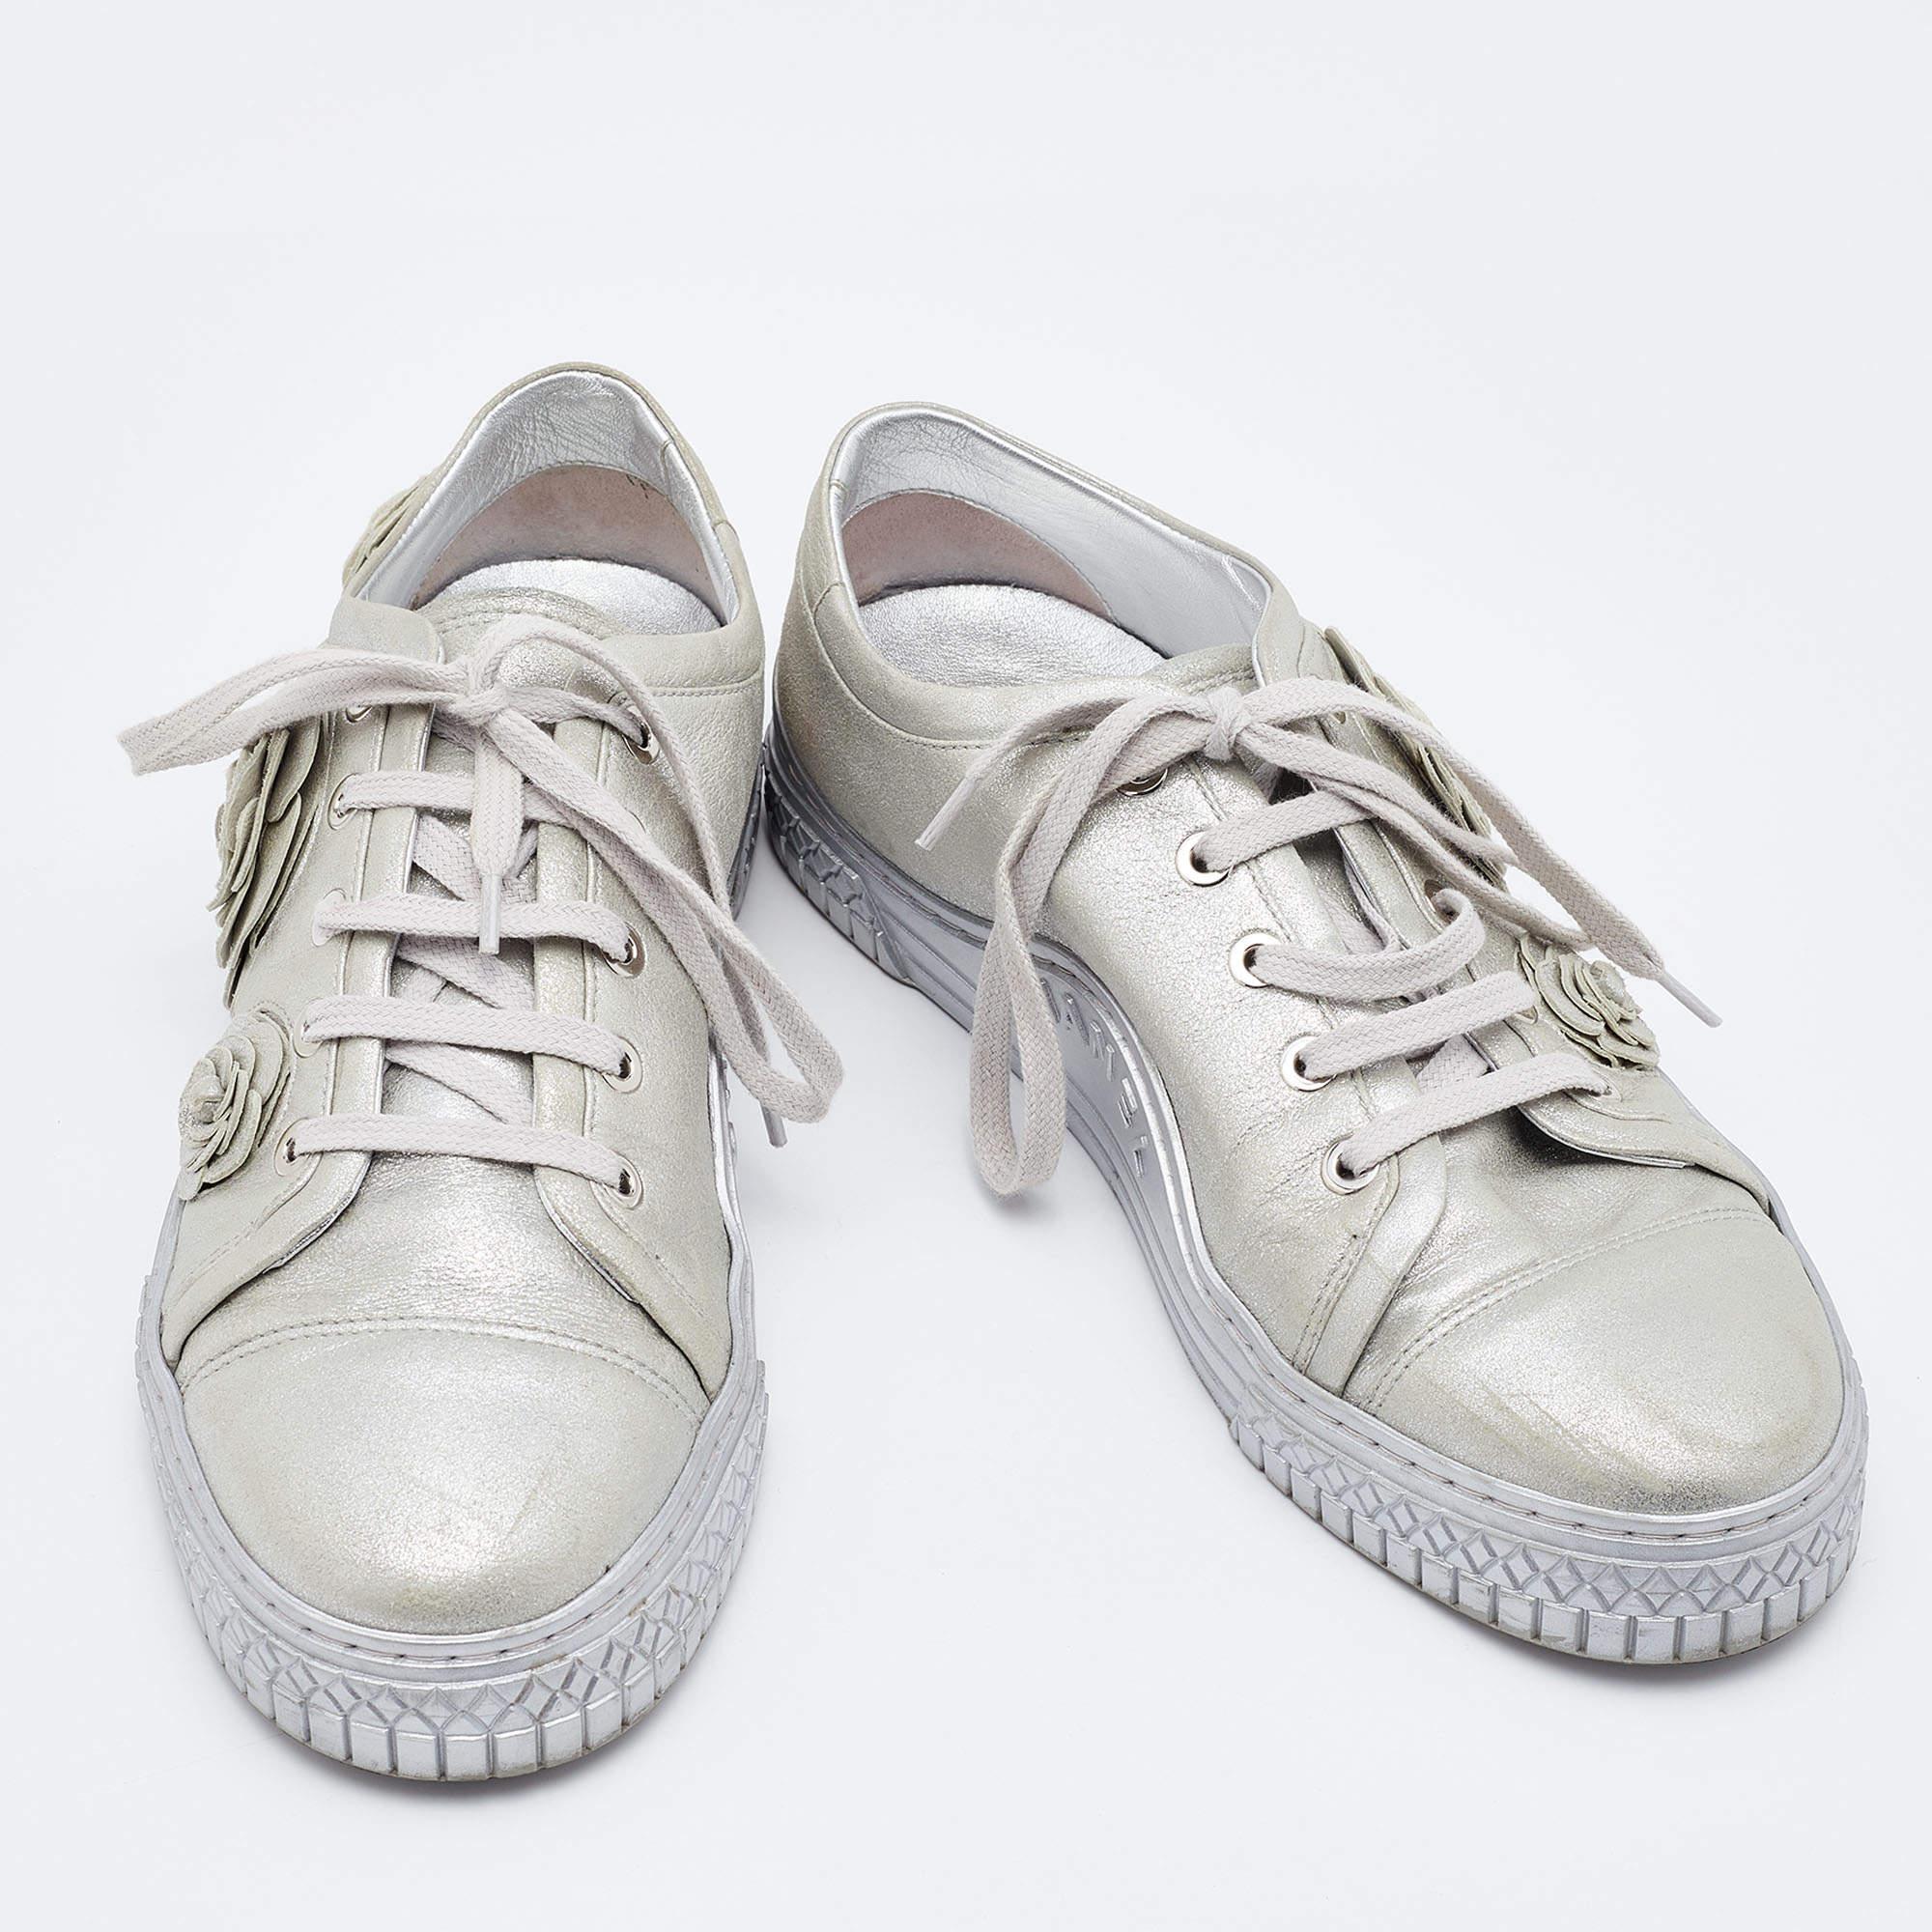 Chanel Silver Suede Camellia Low-Top Sneakers Size 37 1